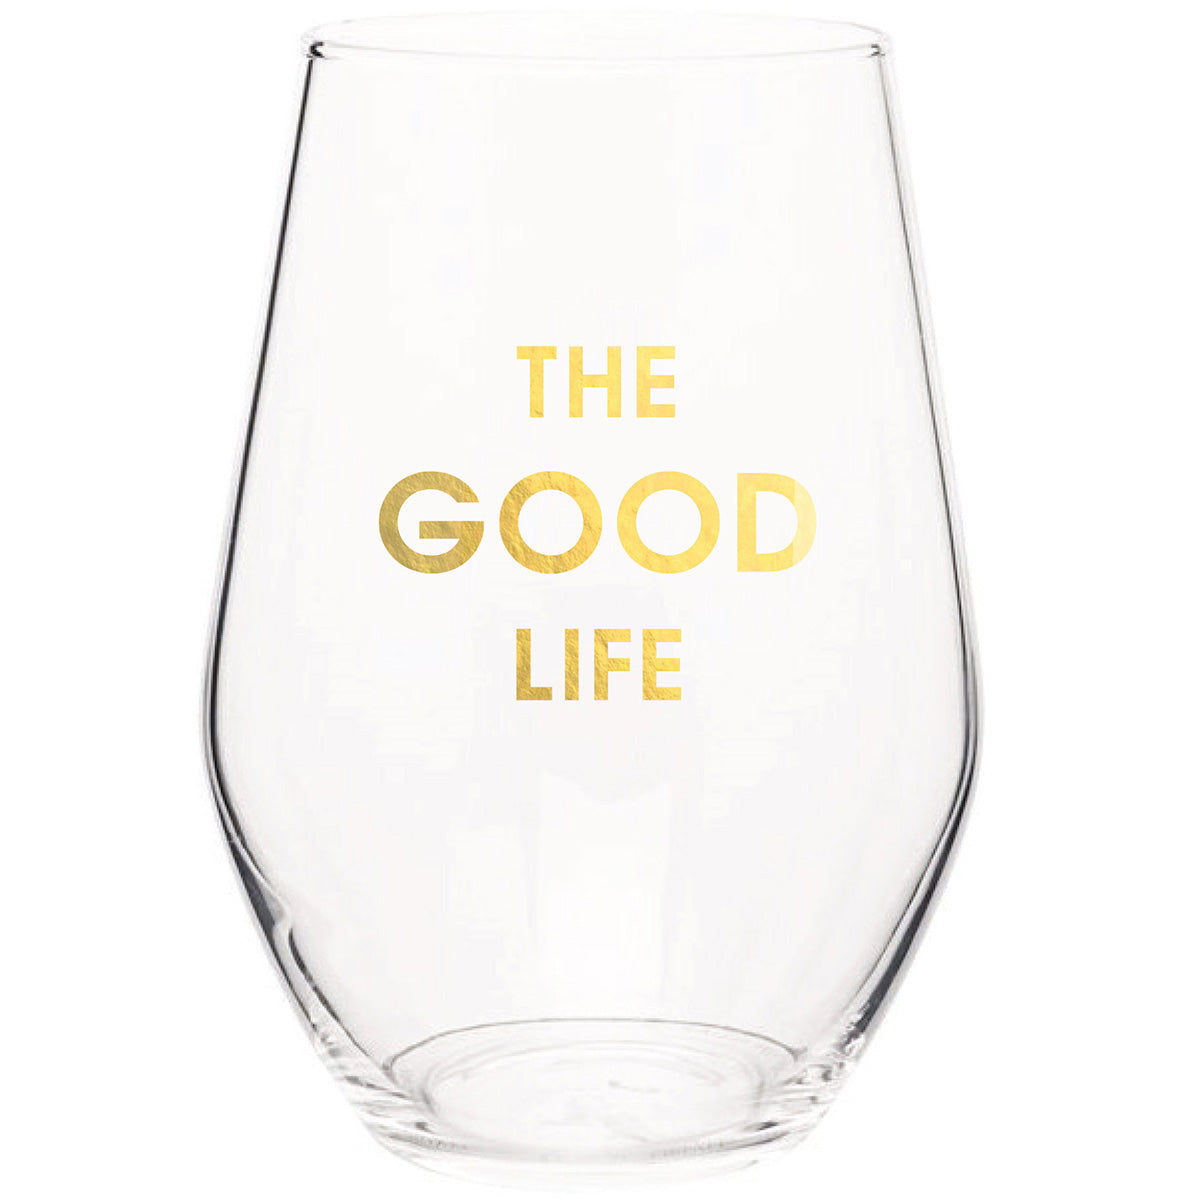 The Good Life - Gold Foil Stemless Wine Glass